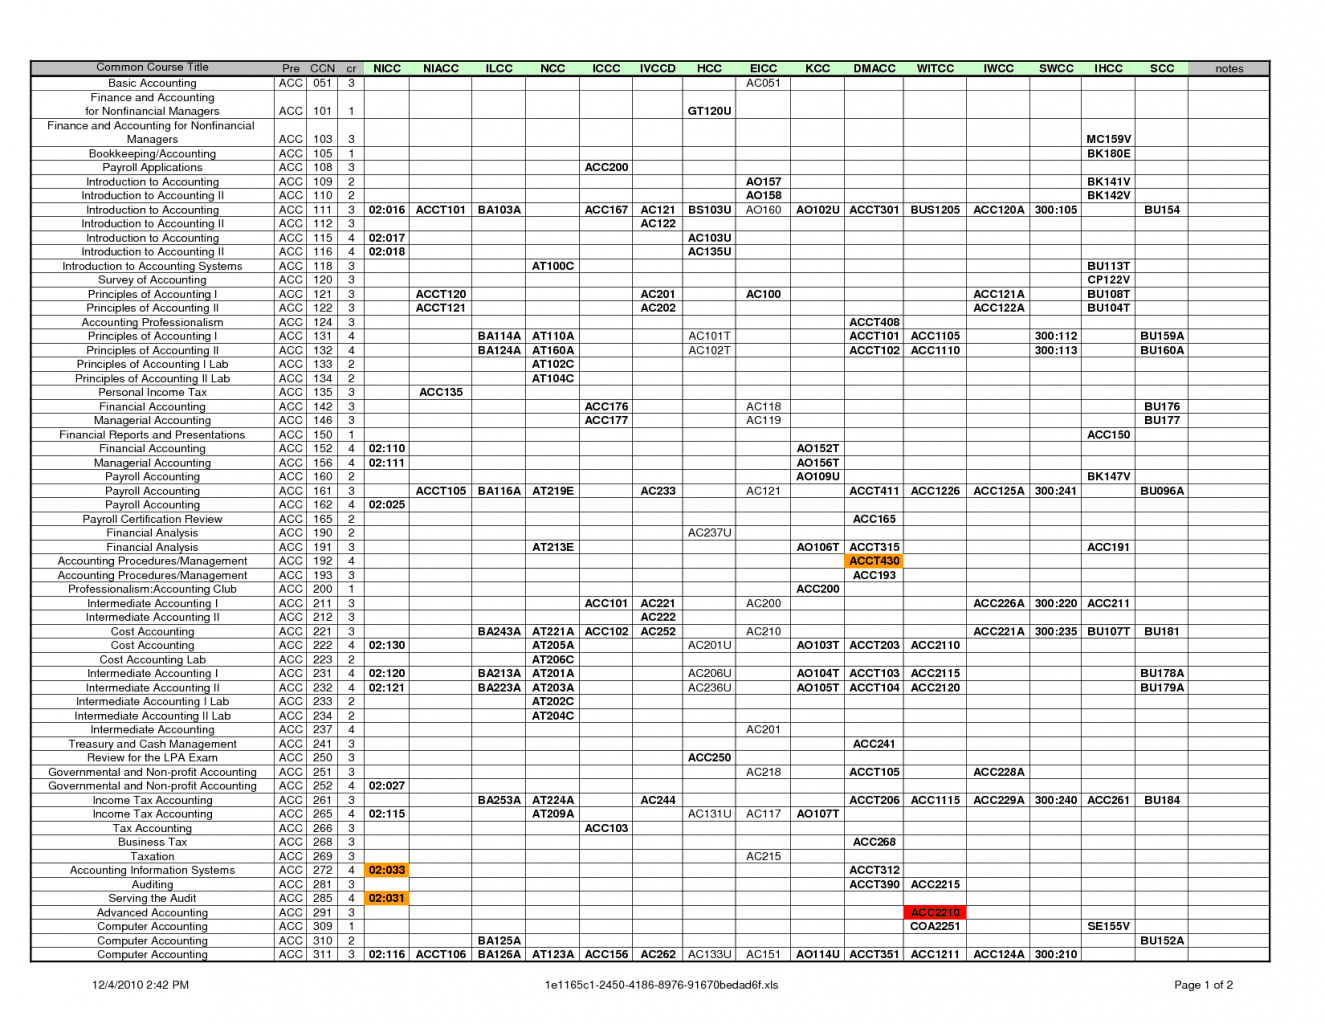 Small Business Expense Spreadsheet Template